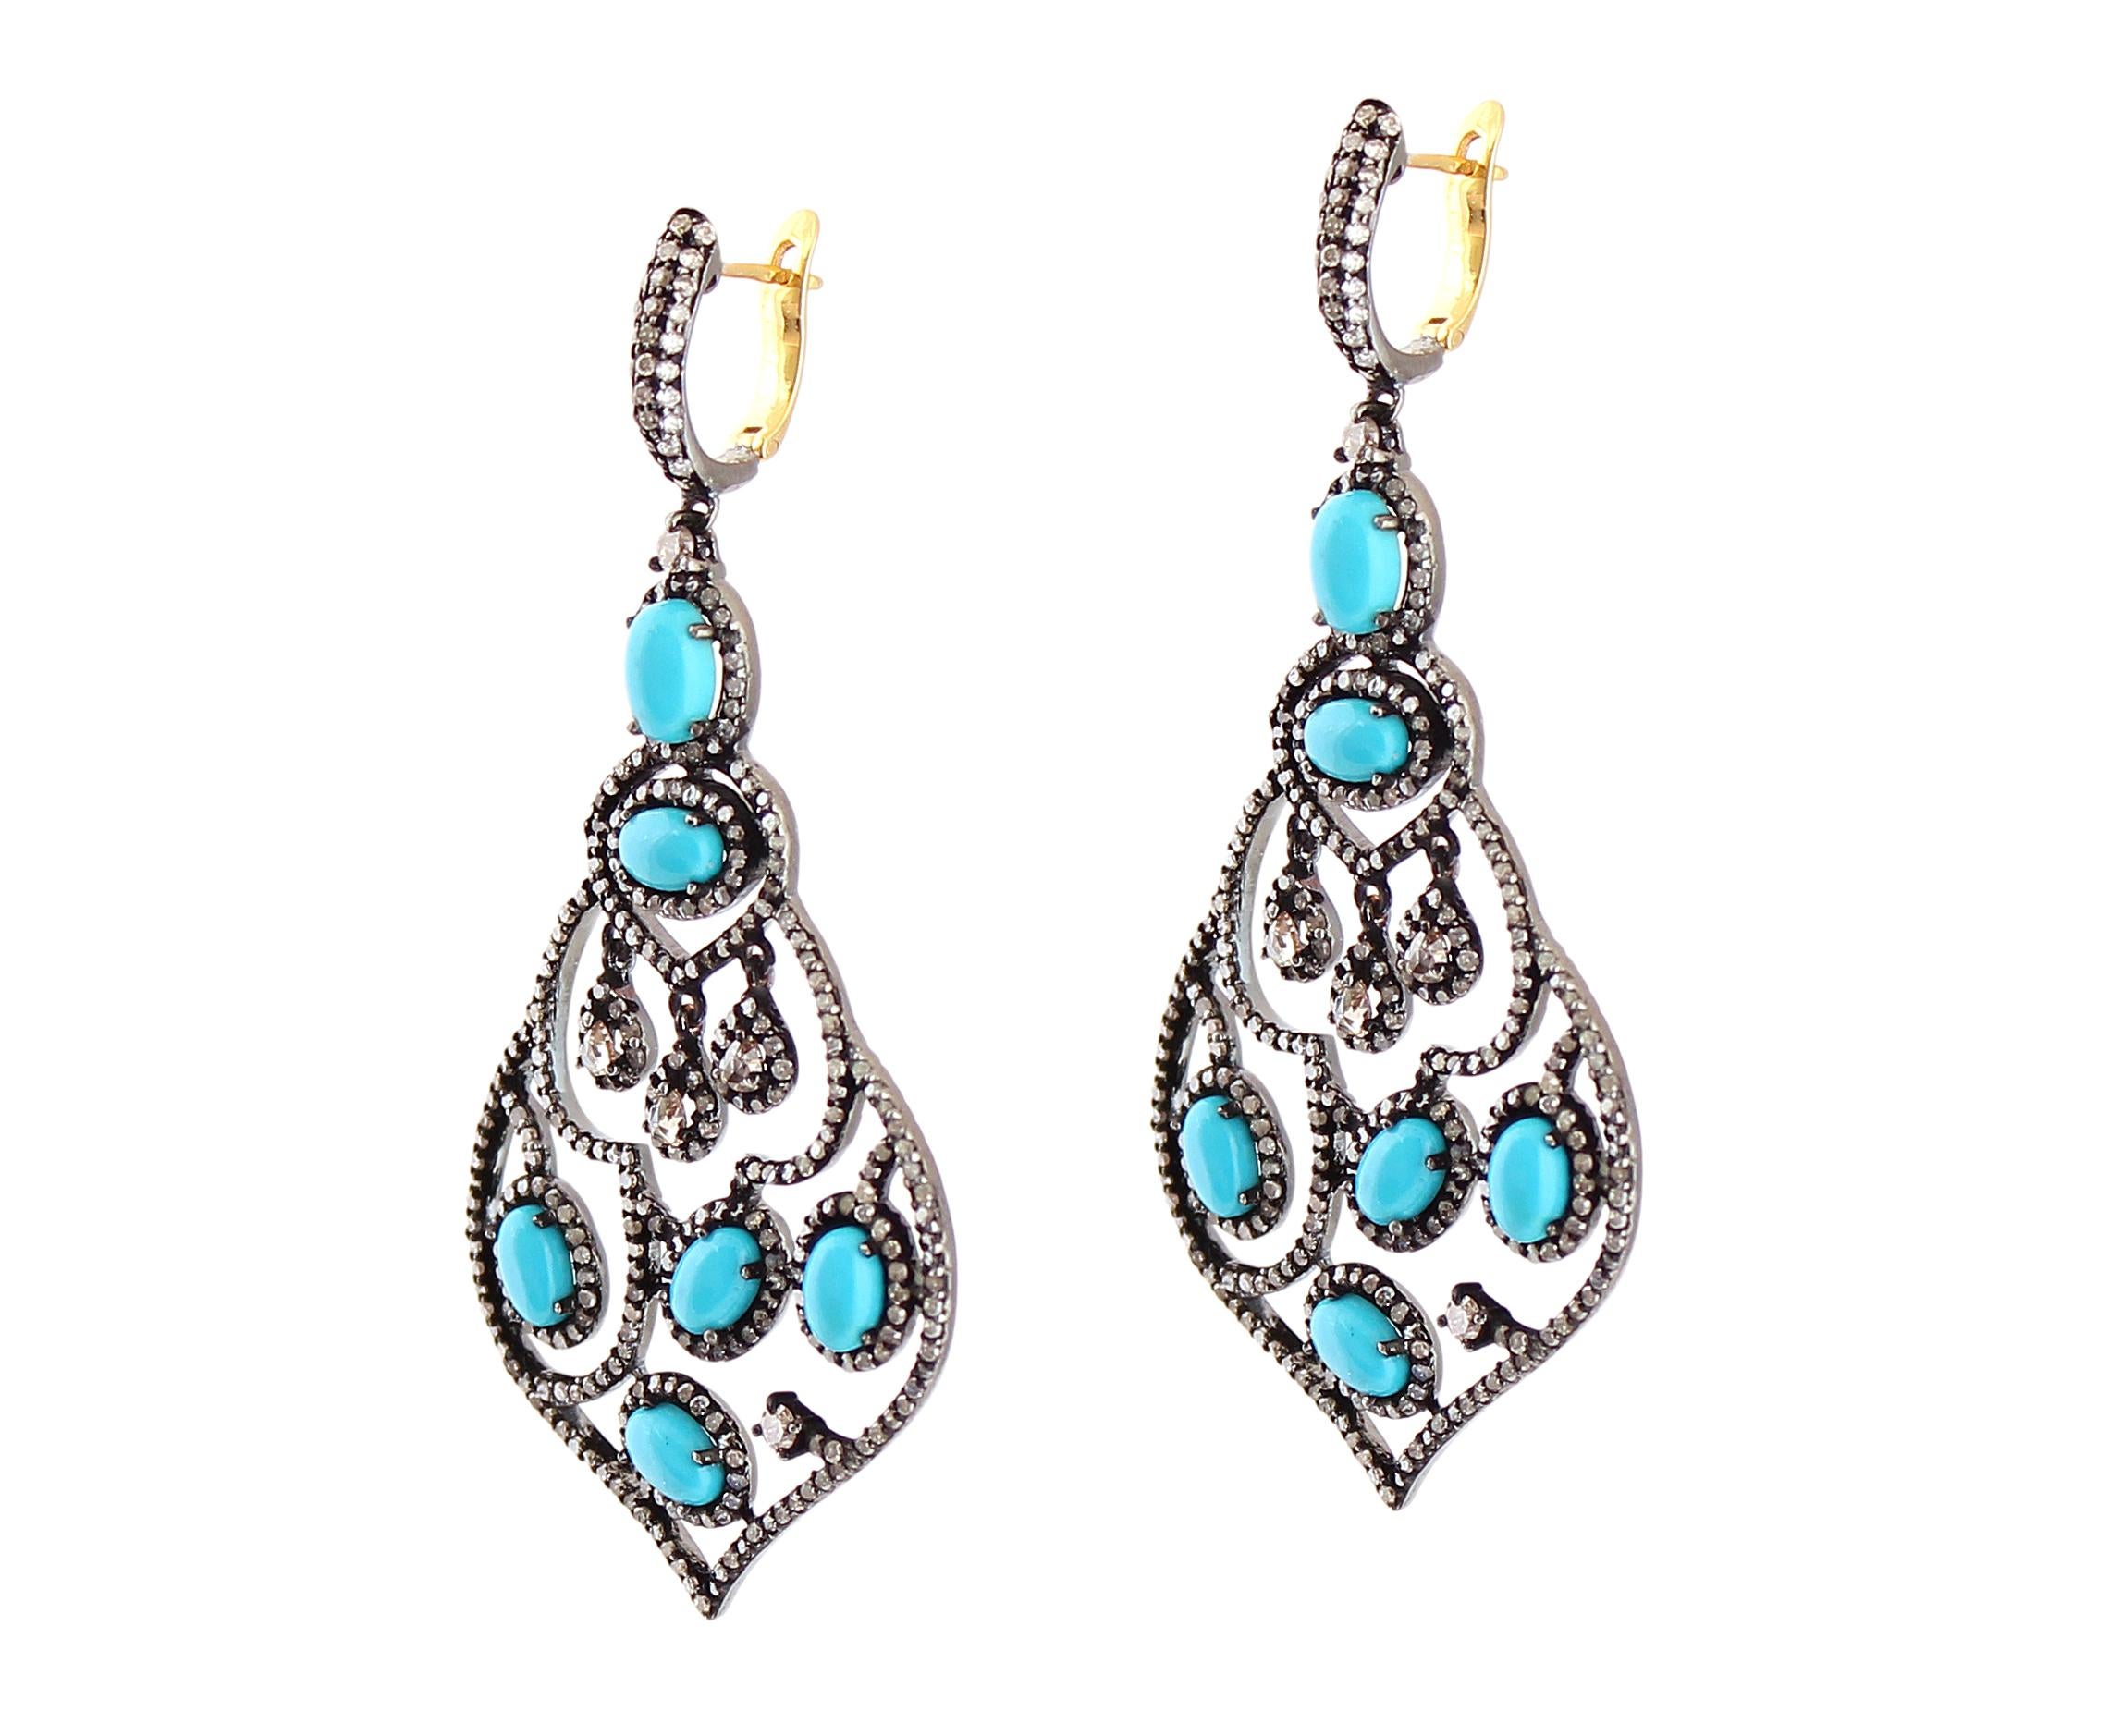 Oval Cut 8.51 Carat Diamond and Turquoise Victorian Chandelier Earrings in 18k/925 Silver